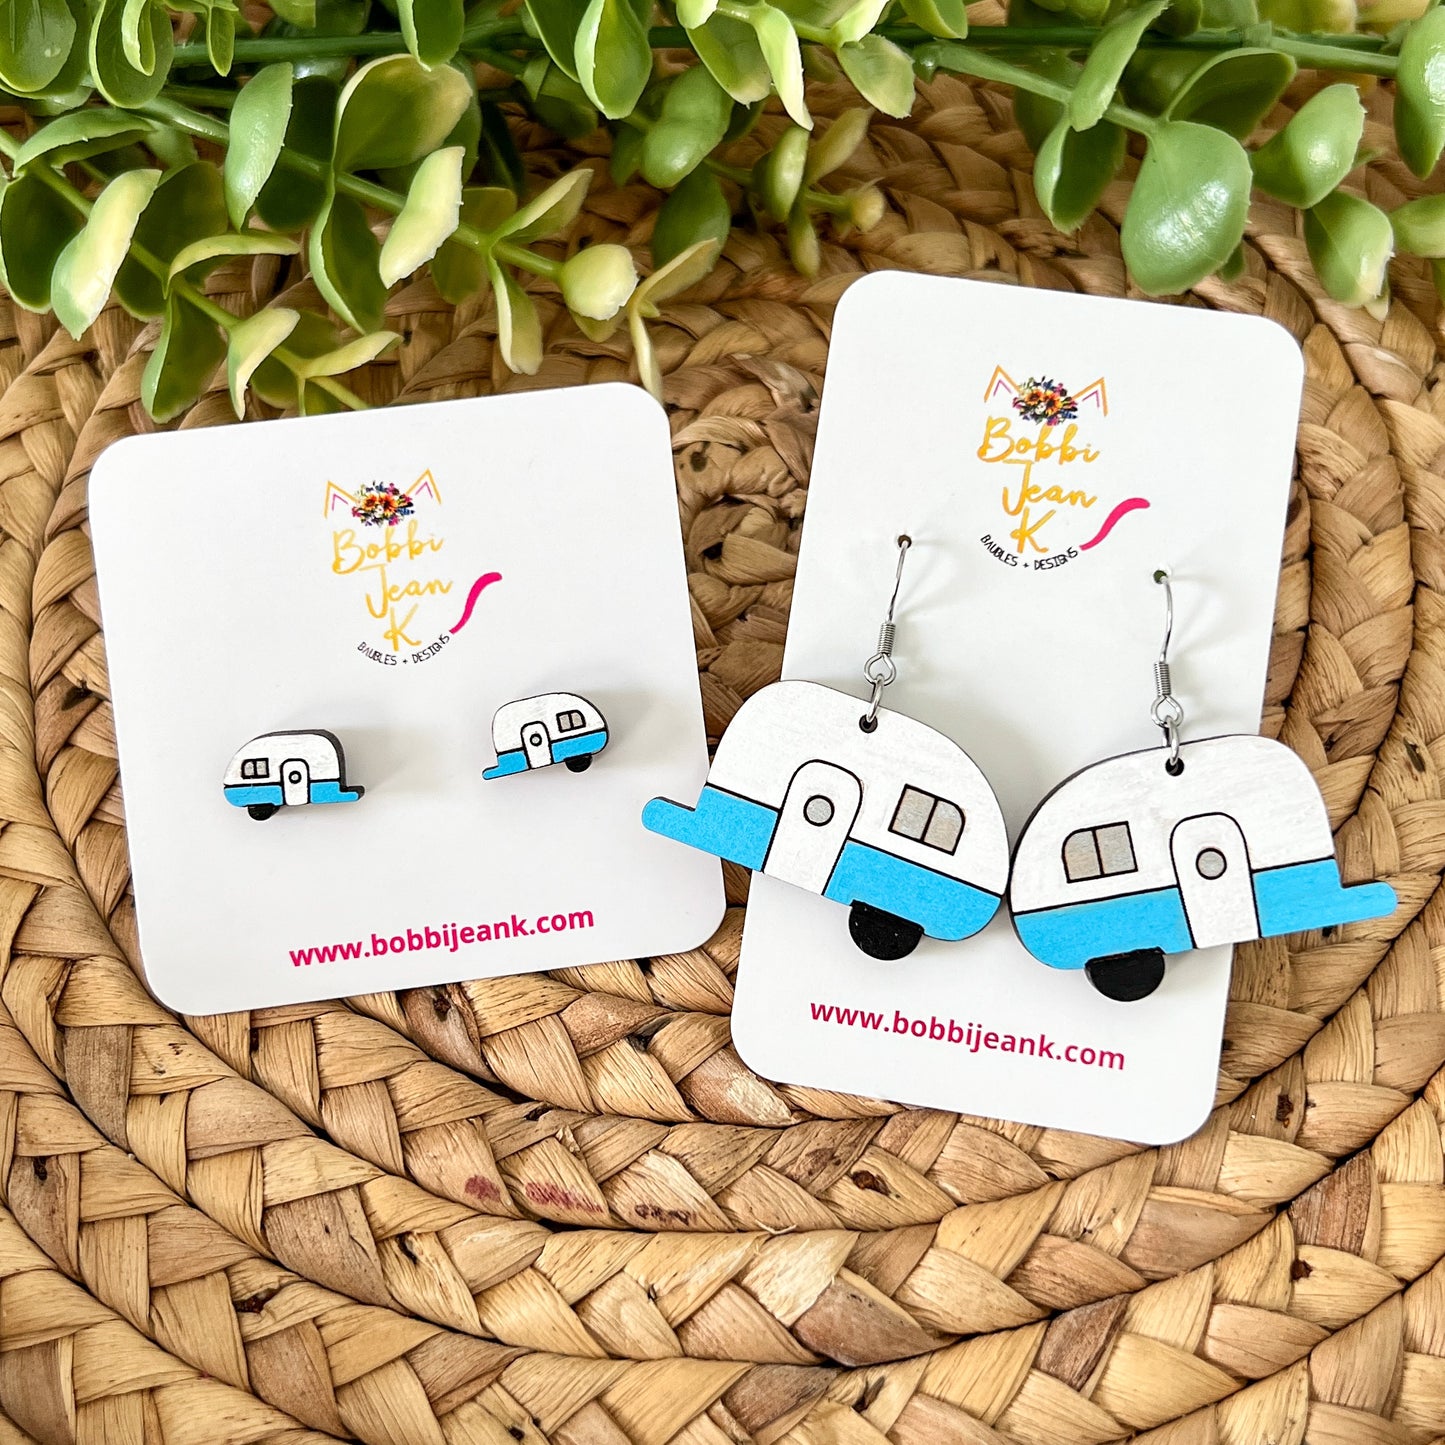 Camper Hand Painted Wood Studs: Choose From 2 Colors